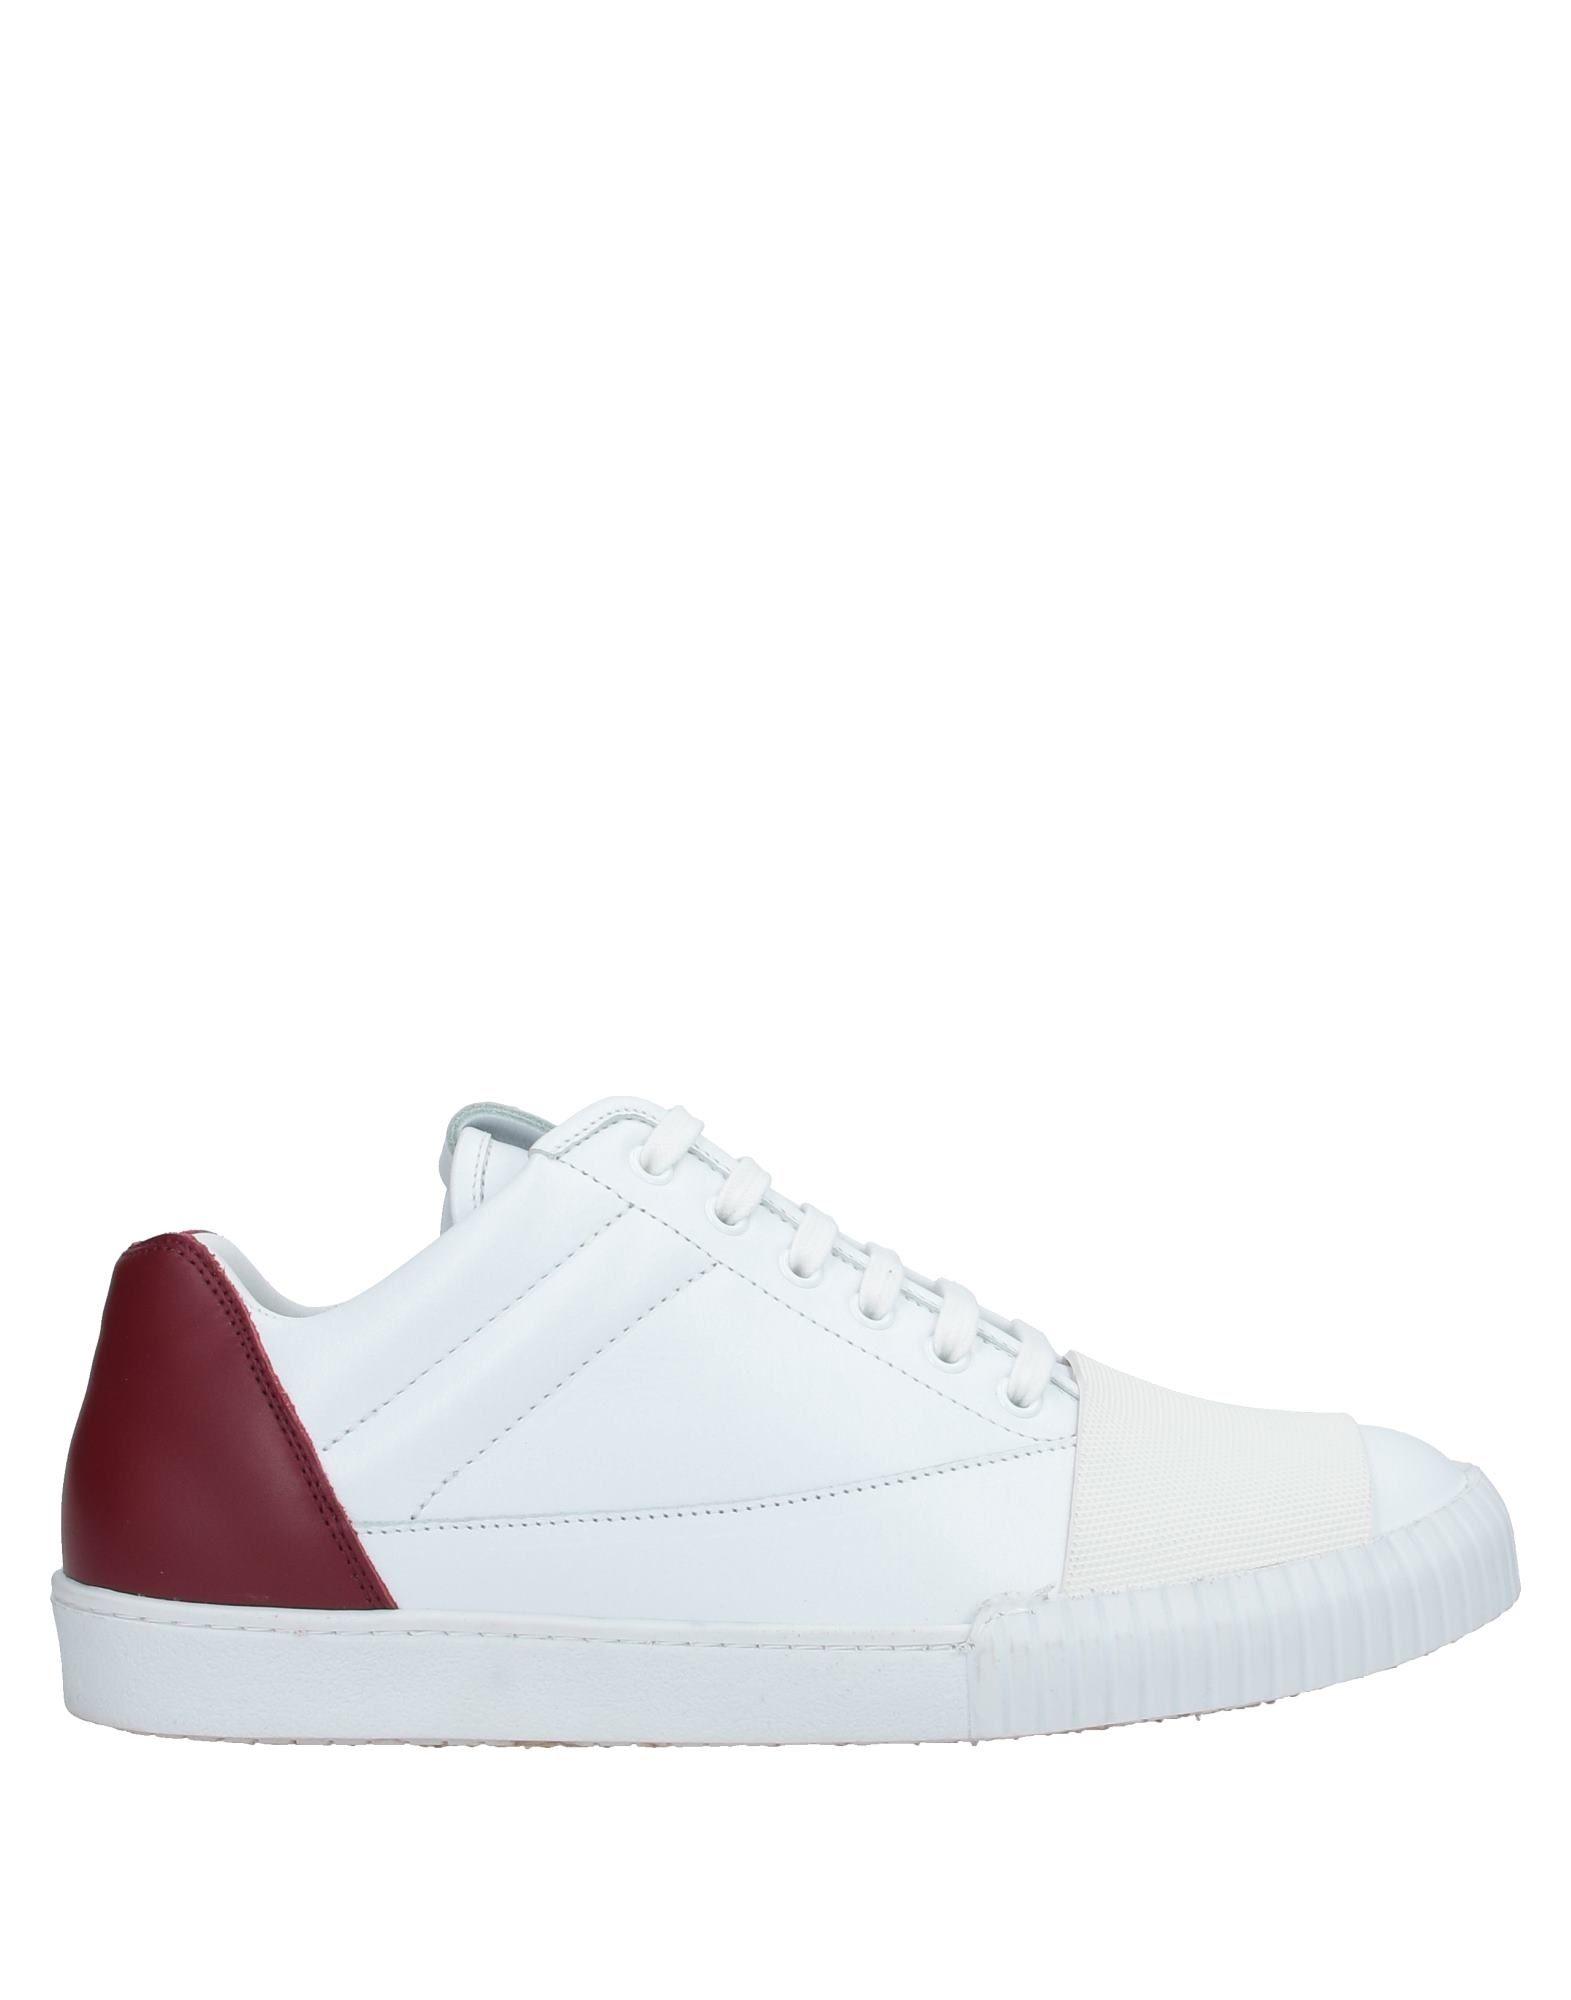 Marni Leather Low-tops & Sneakers in White for Men - Lyst